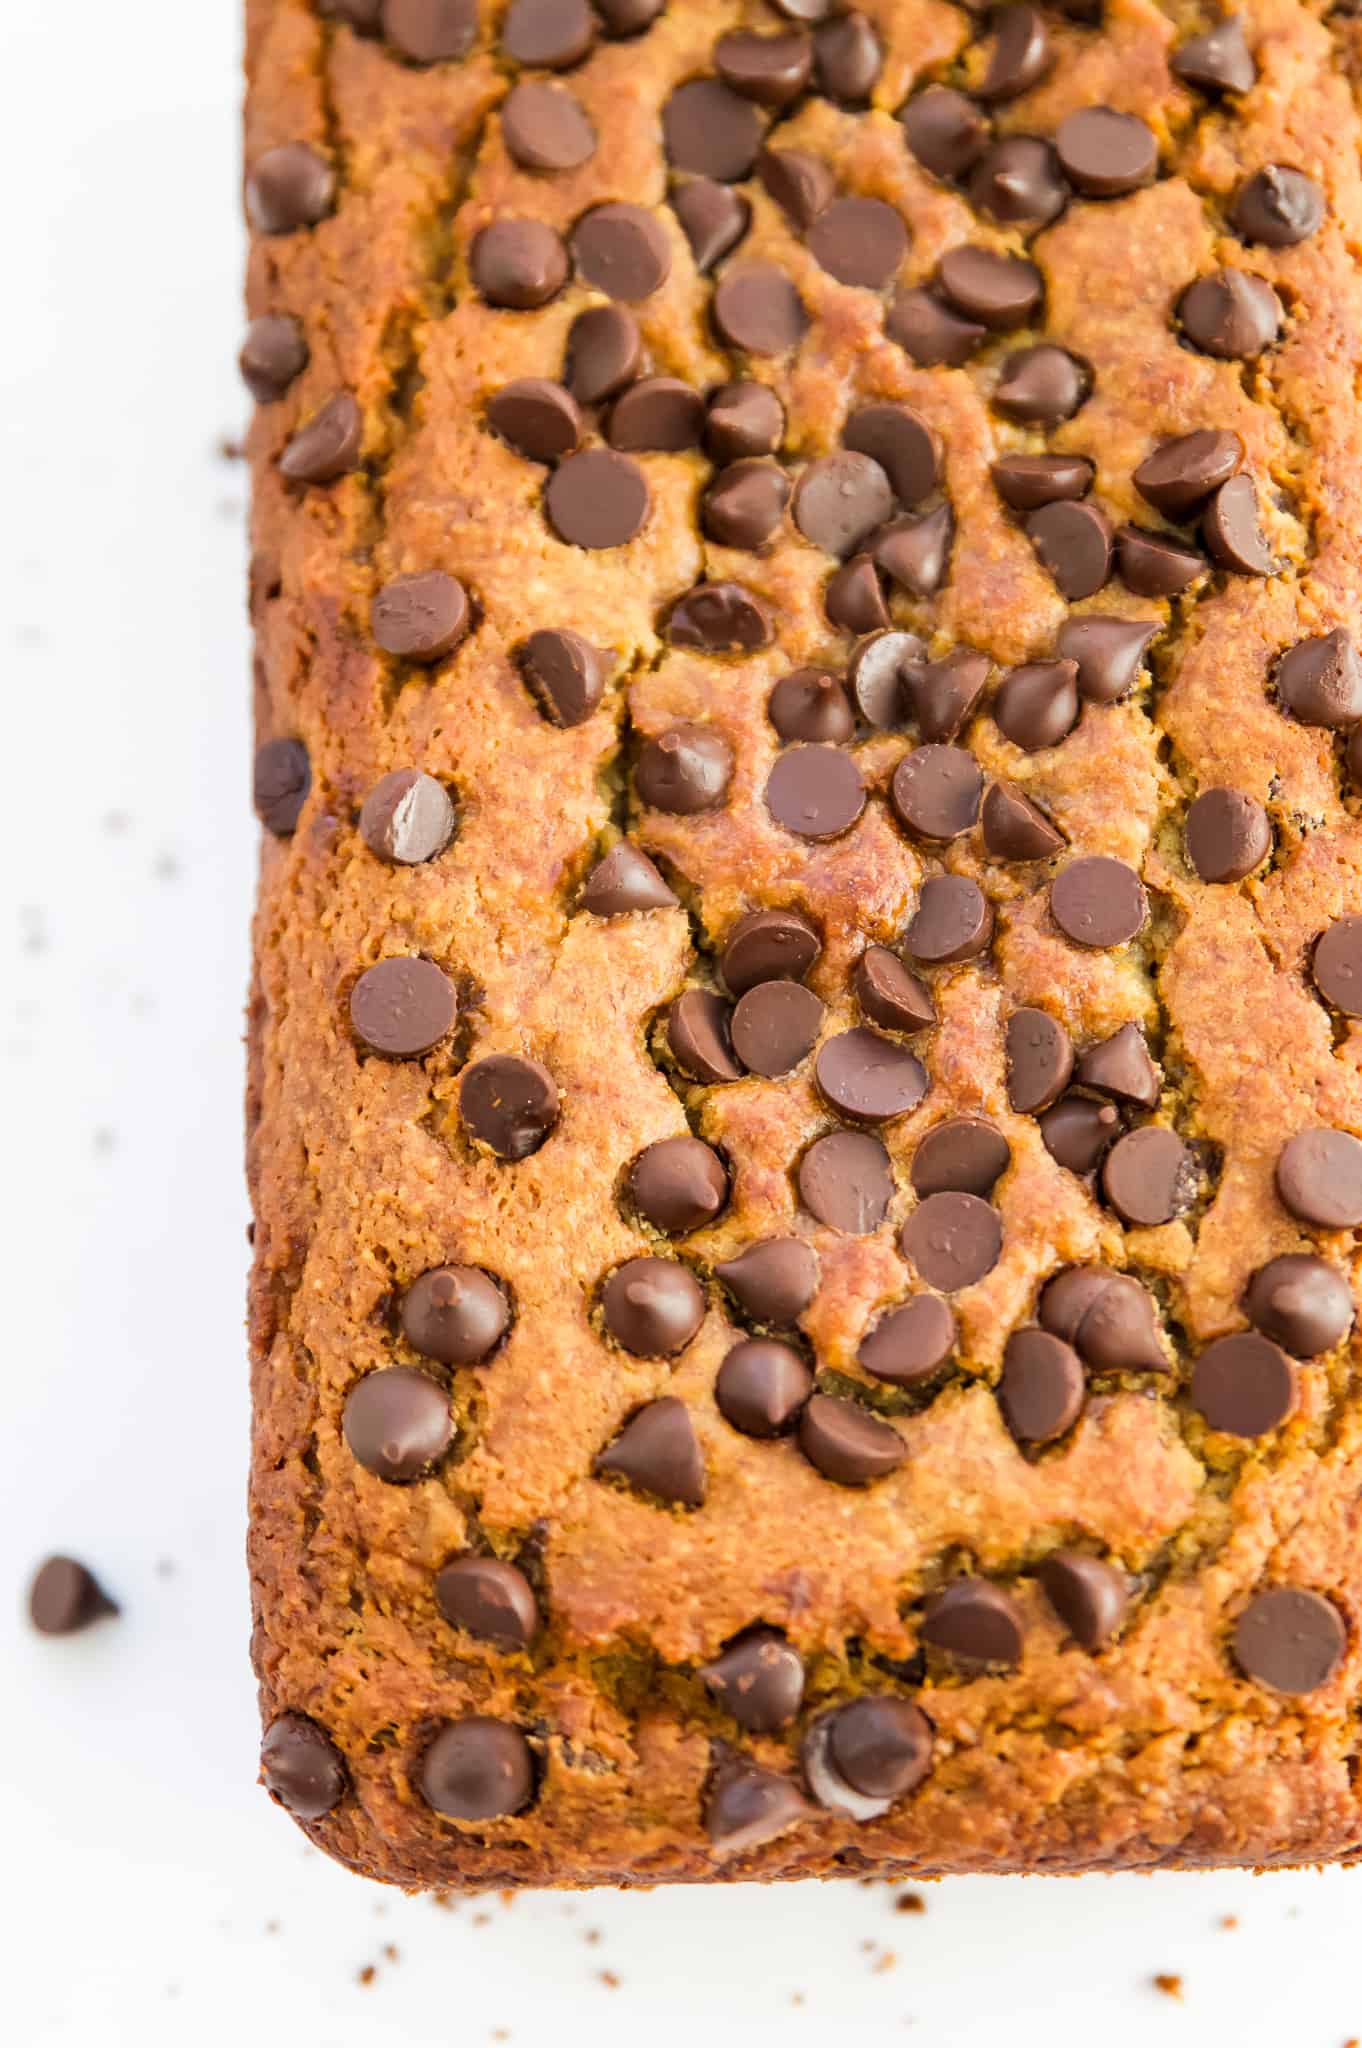 A loaf of gluten free chocolate chip banana bread